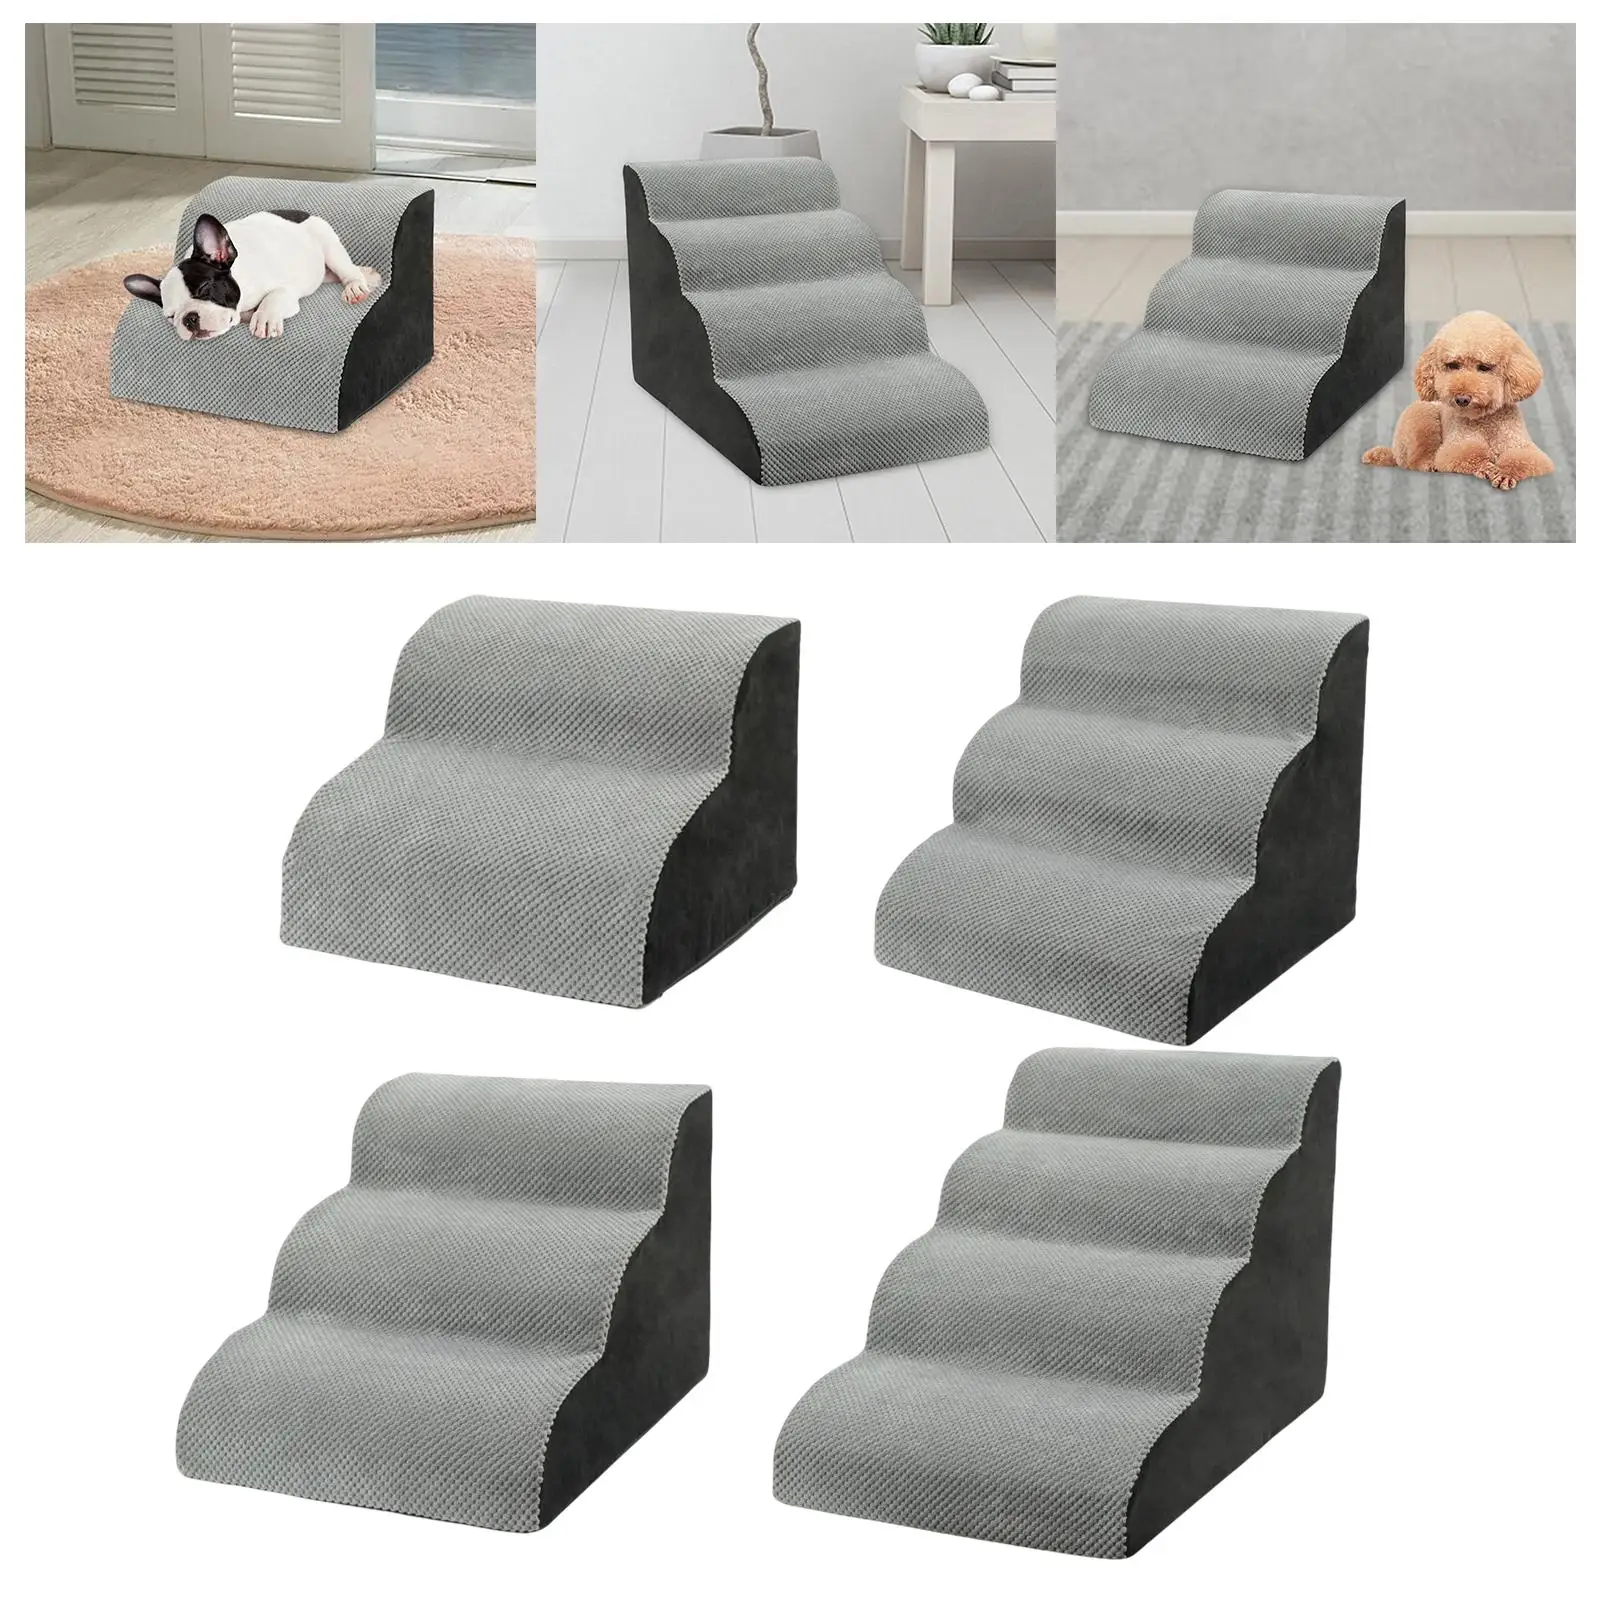 Comfortable Dog Stairs Pet Ramp Ladder Climbing up Portable with Detachable Cover Wide Dog Bed Stairs Pet Supplies Couch Bed